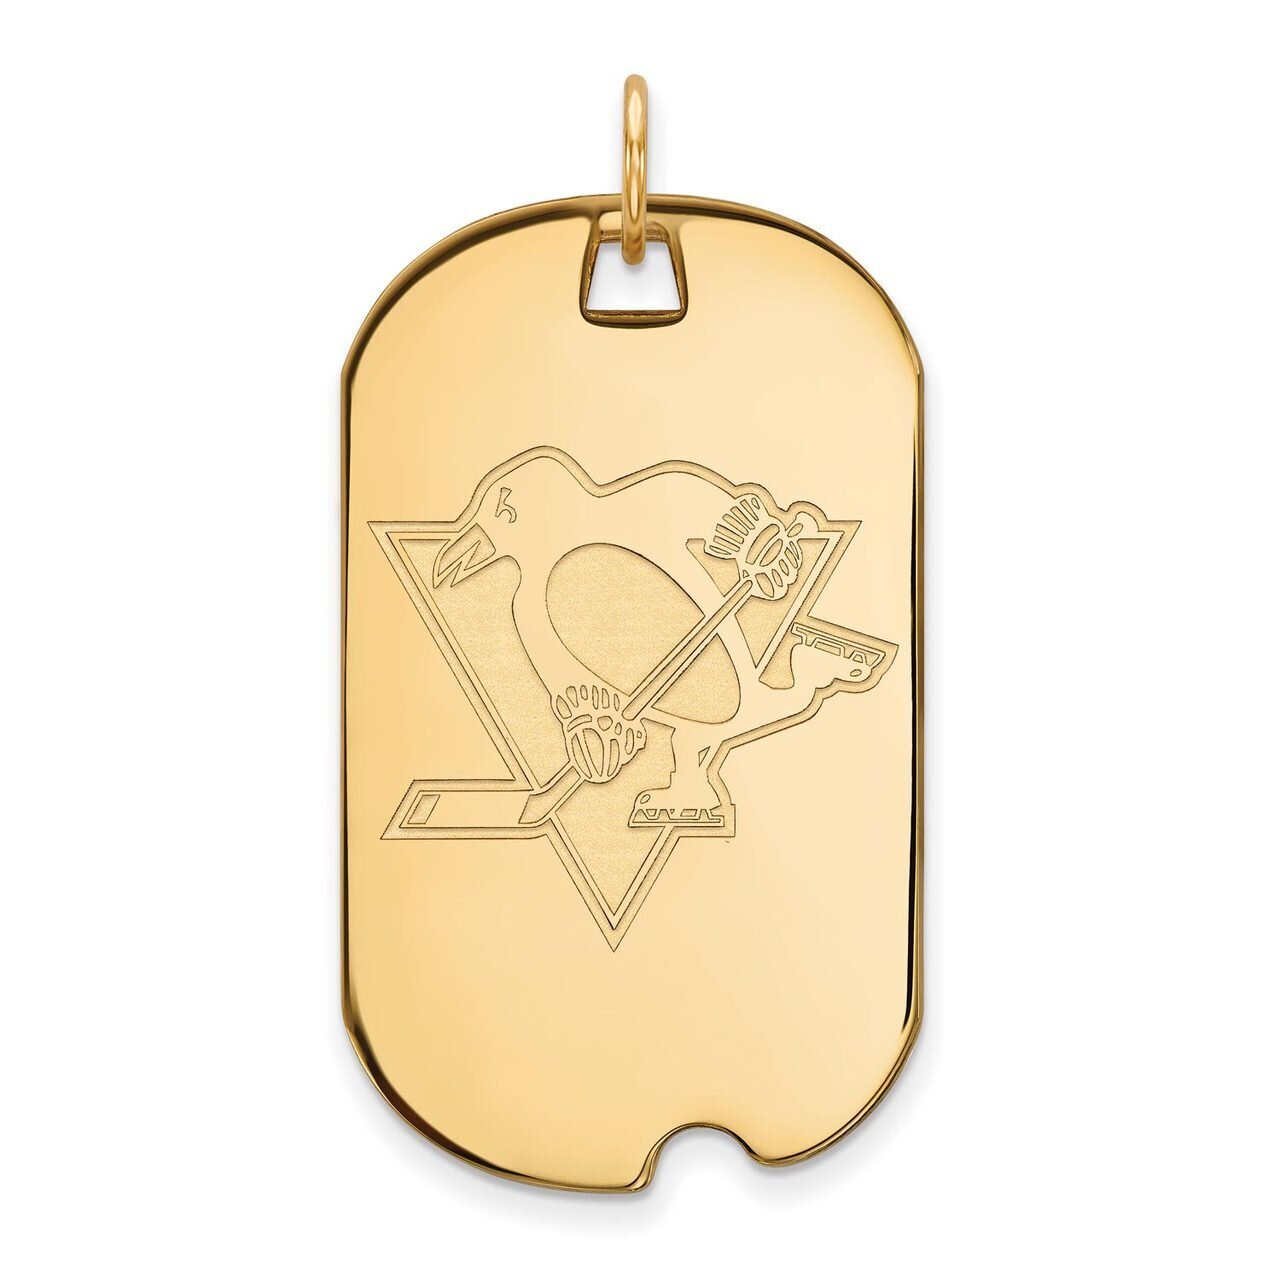 Pittsburh Penguins Large Dog Tag 10k Yellow Gold 1Y025PEN